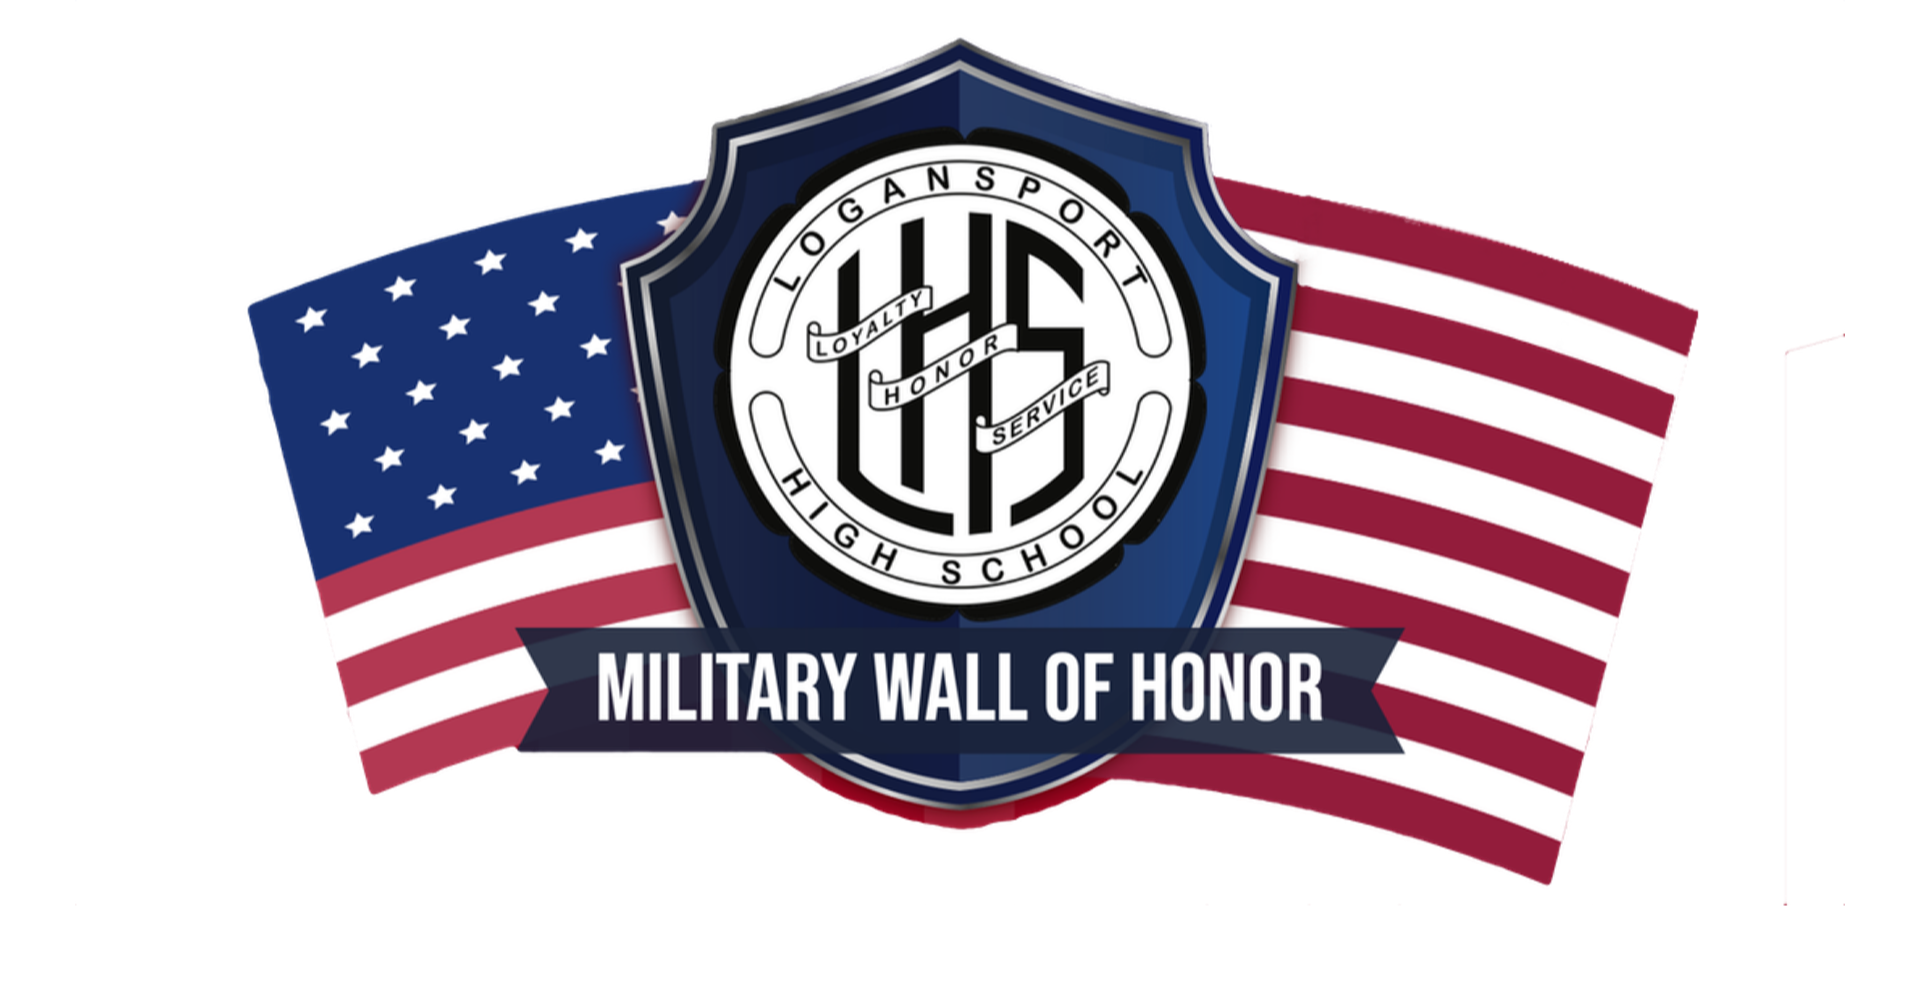 Military Wall of Honor